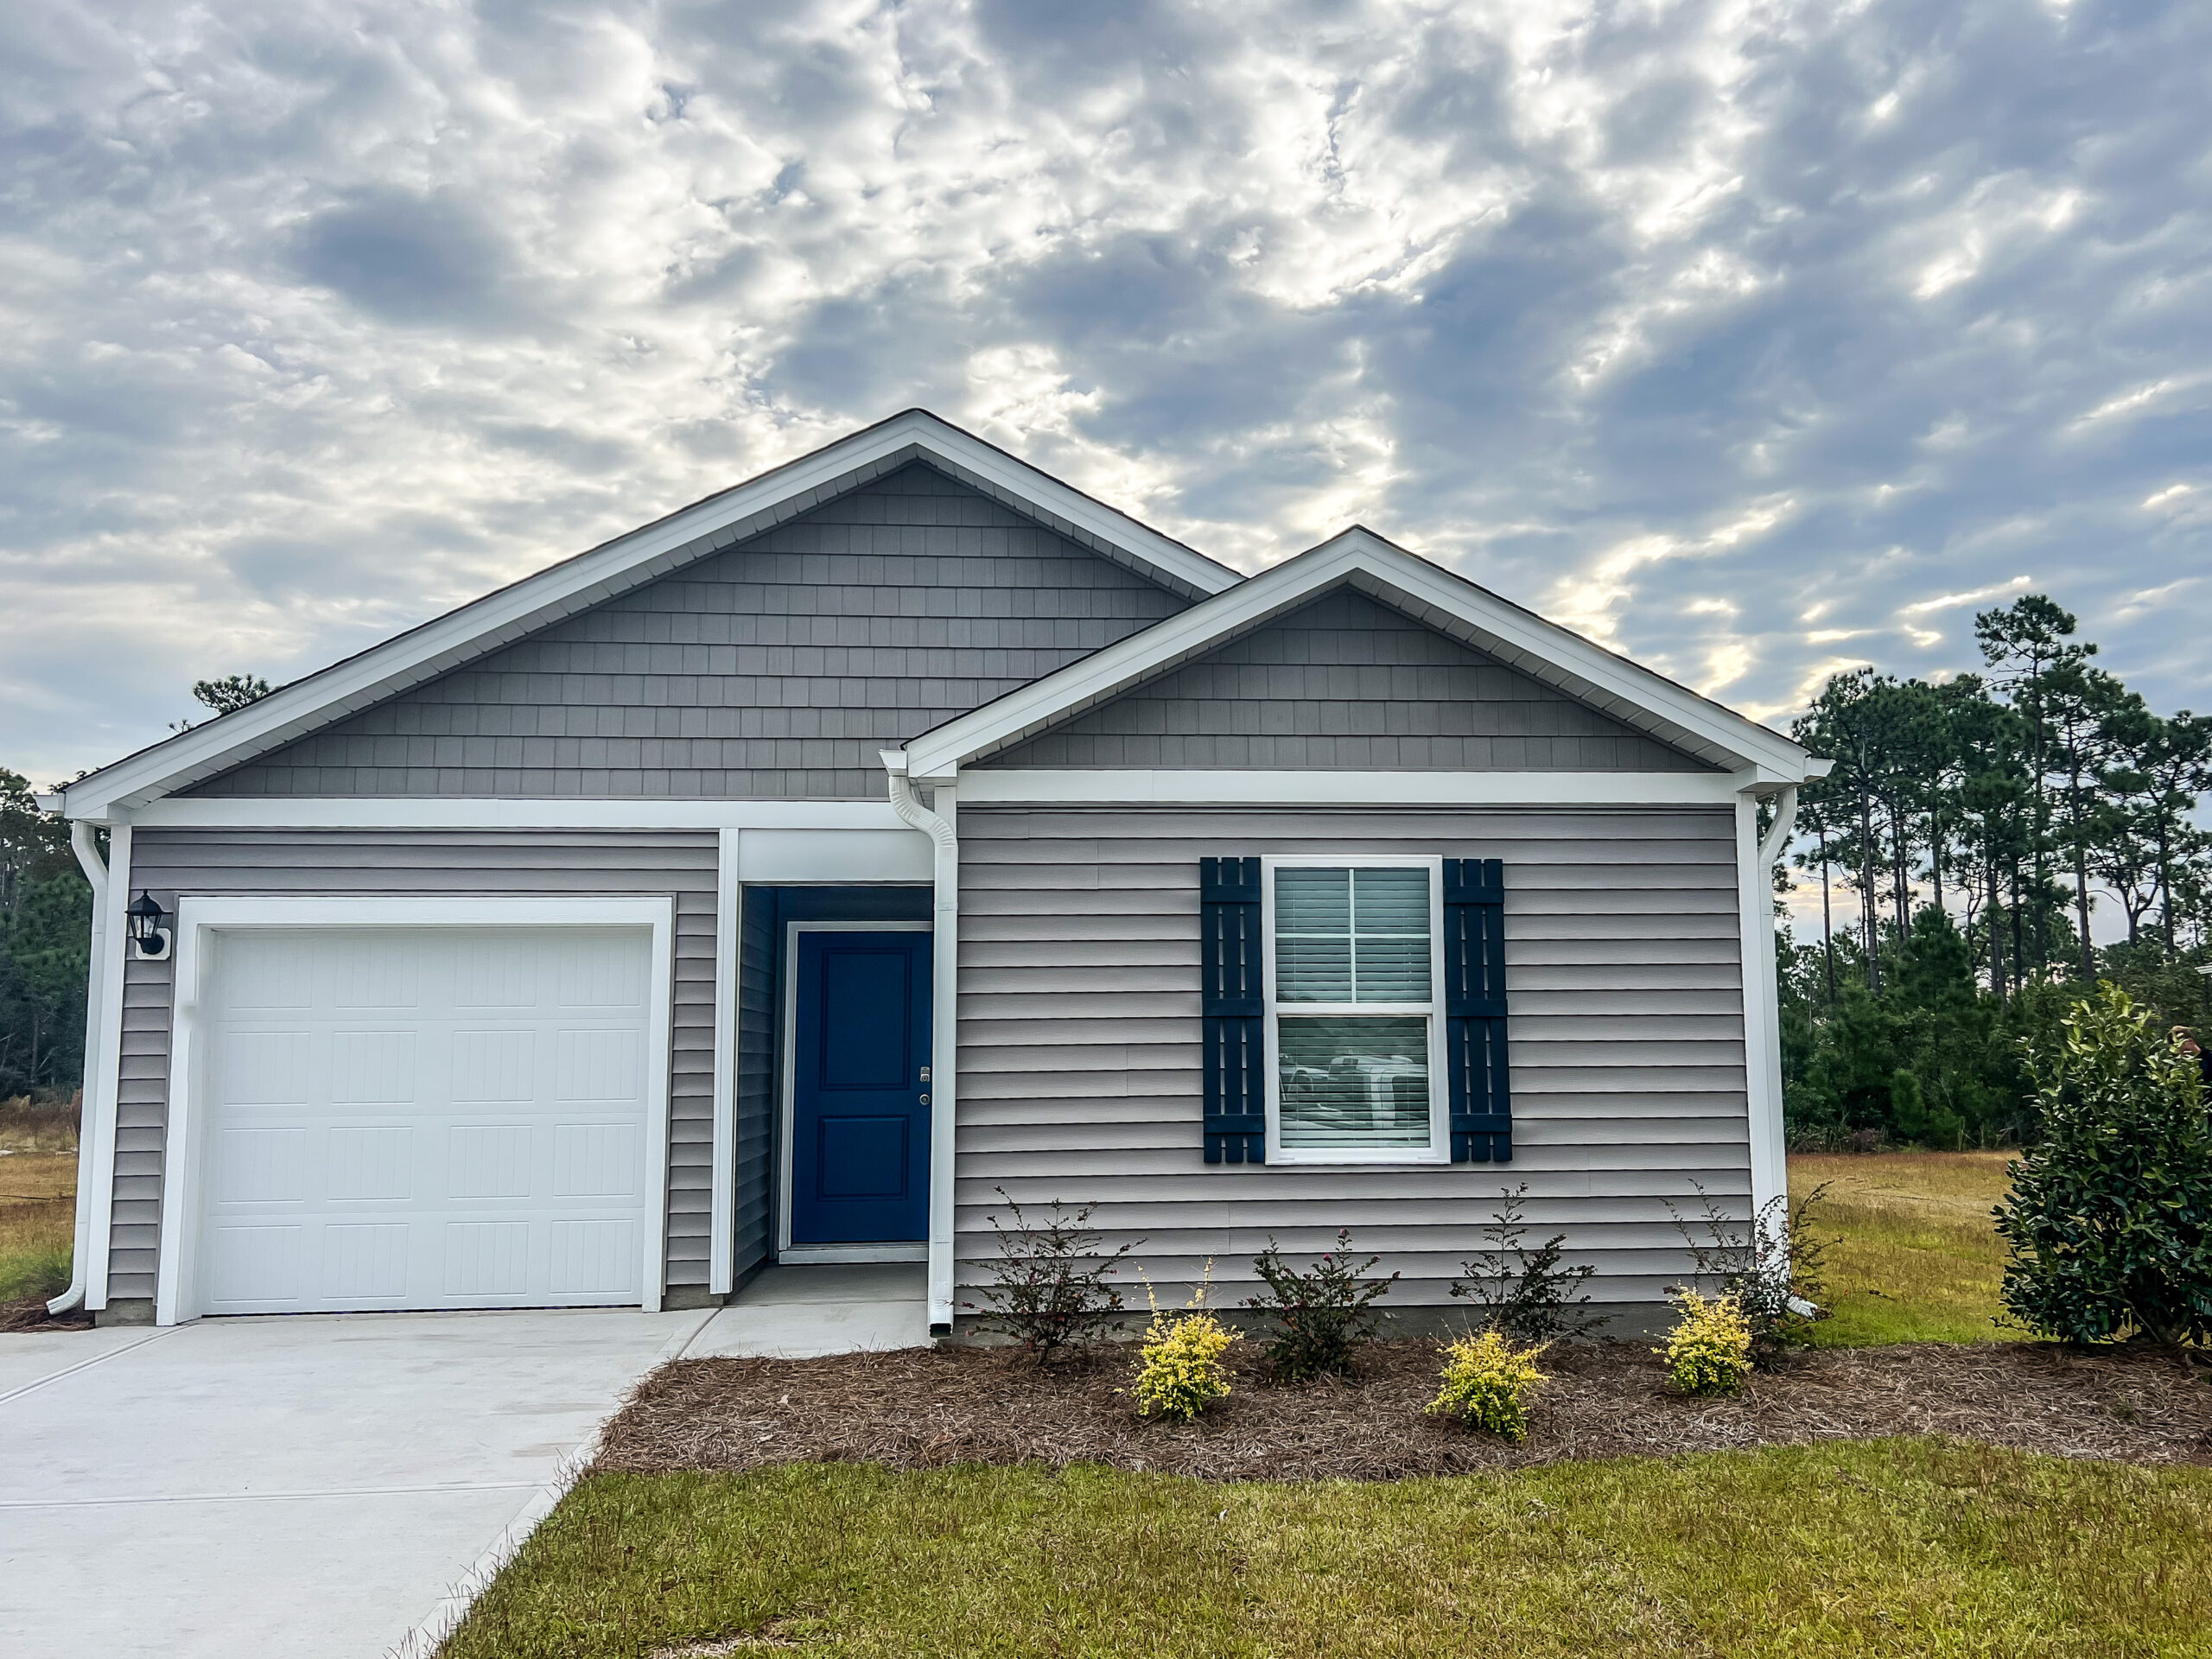 Congratulations on your recent home purchase! I am thrilled to see you embark on this exciting journey of homeownership, and equally excited for you to start living the coastal dream in your new construction home, just a 12-minute drive away from the beautiful Oak Island beaches. With the beach practically in your backyard, you'll soon be enjoying the sun, sand, and sea whenever you please.